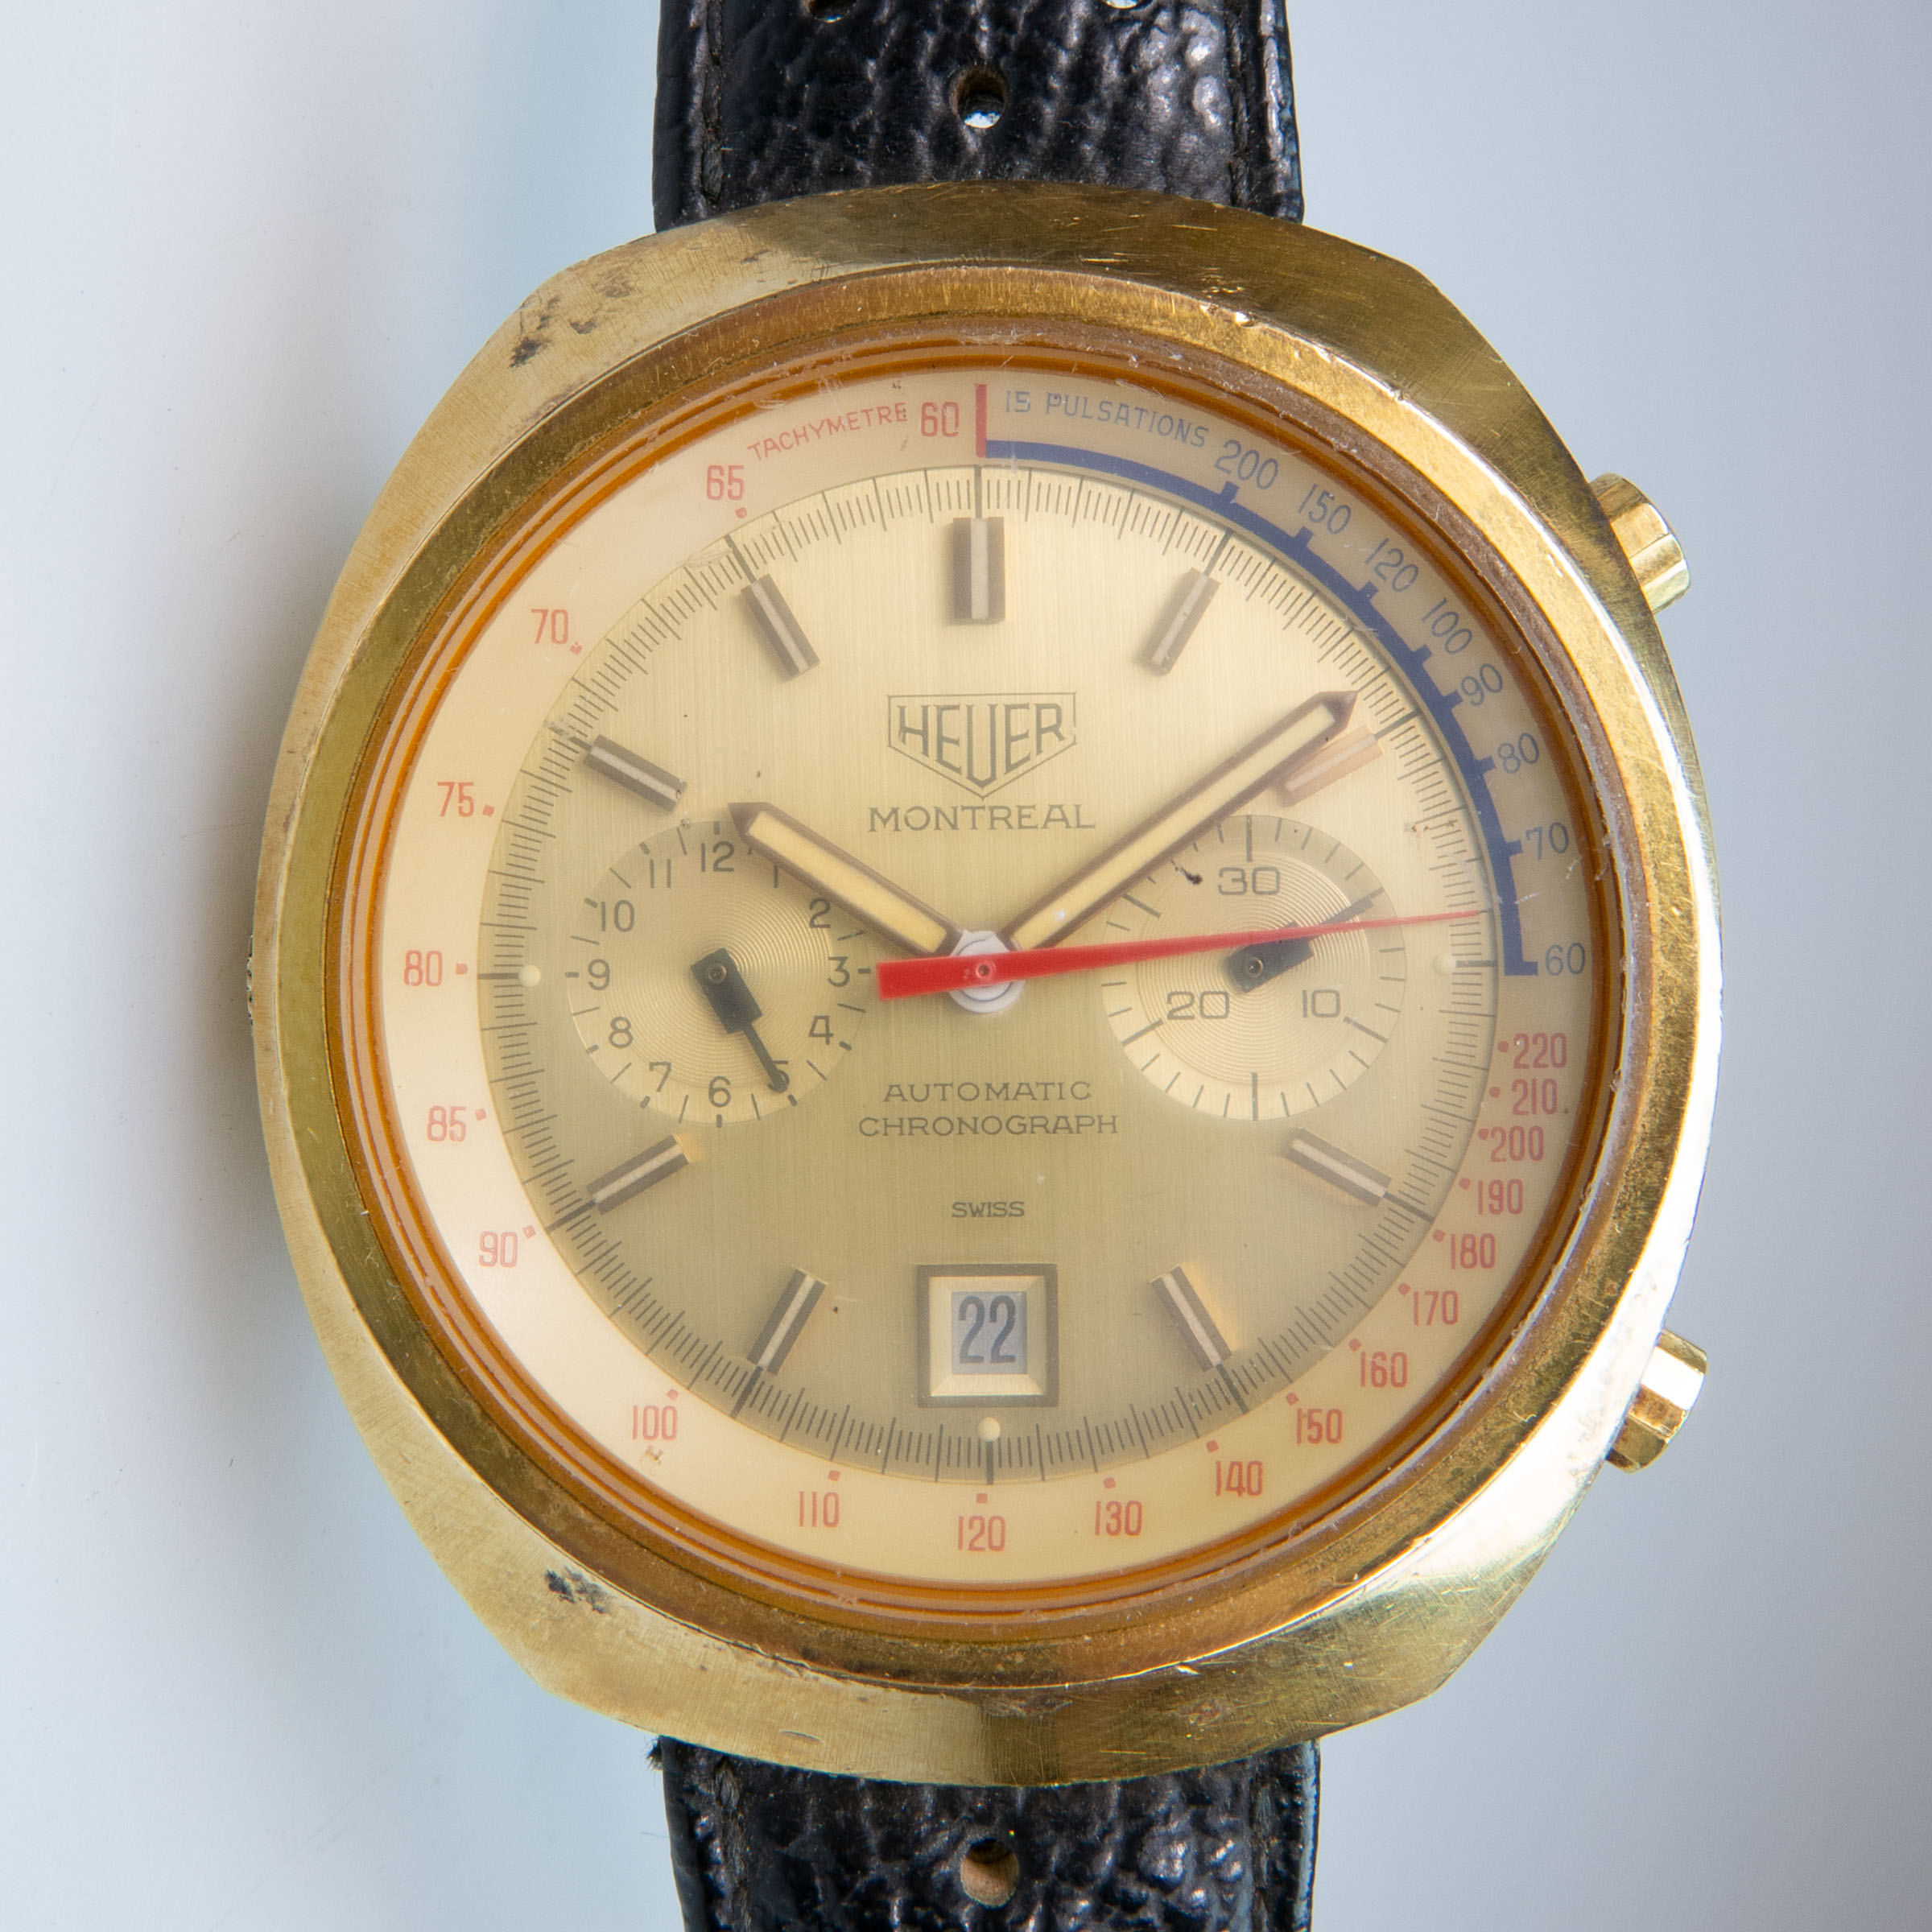 Heuer 'Montreal' Wristwatch With Date And Chronograph